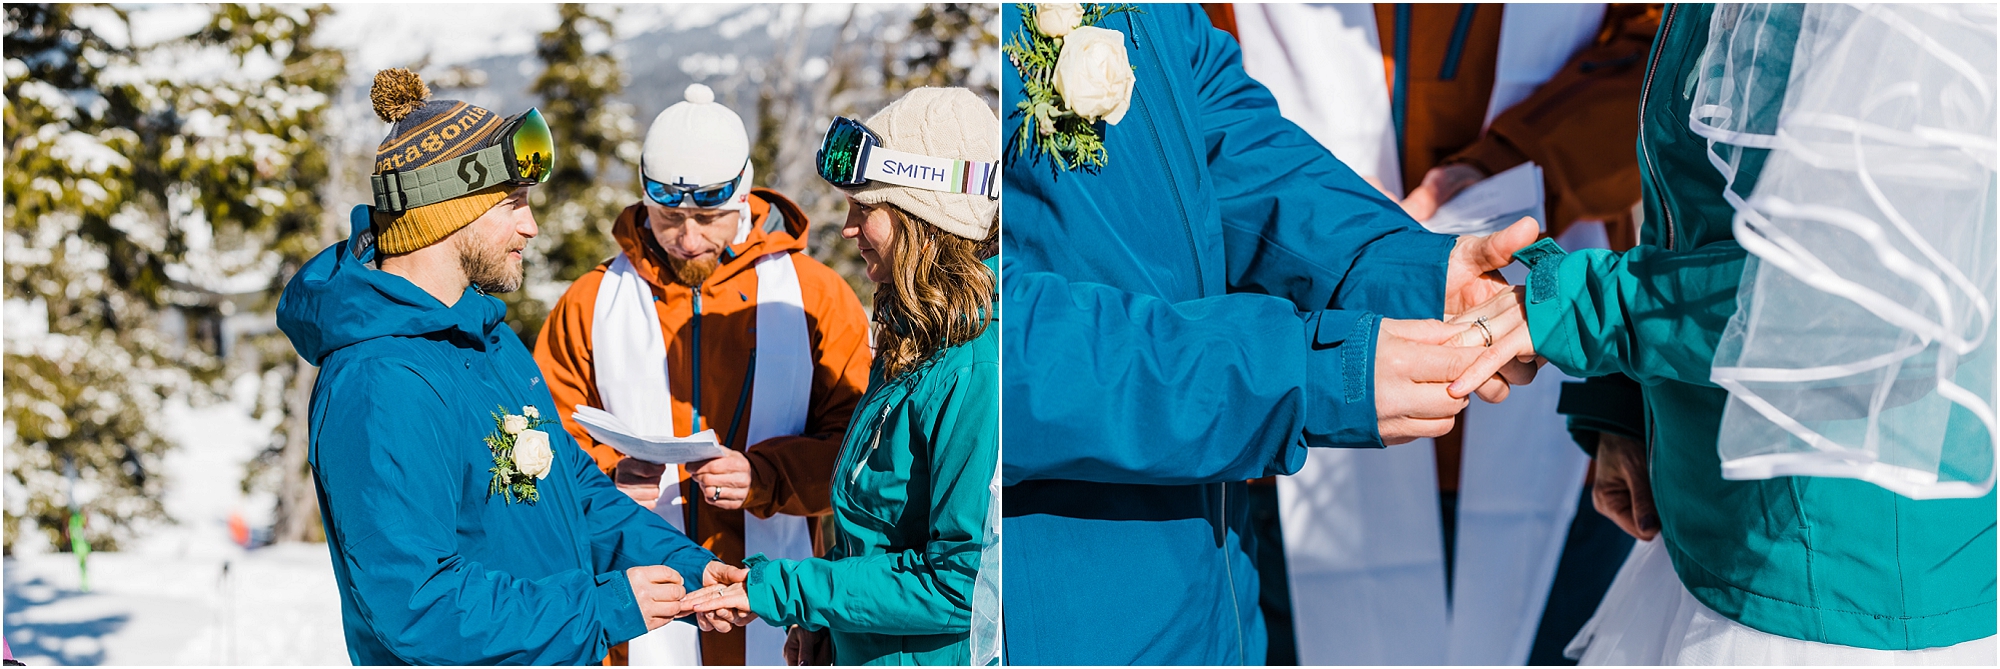 A couple exchanges wedding rings as they say their vows on the slopes of Mt. Bachelor ski resort near Bend, Oregon. | Erica Swantek Photography